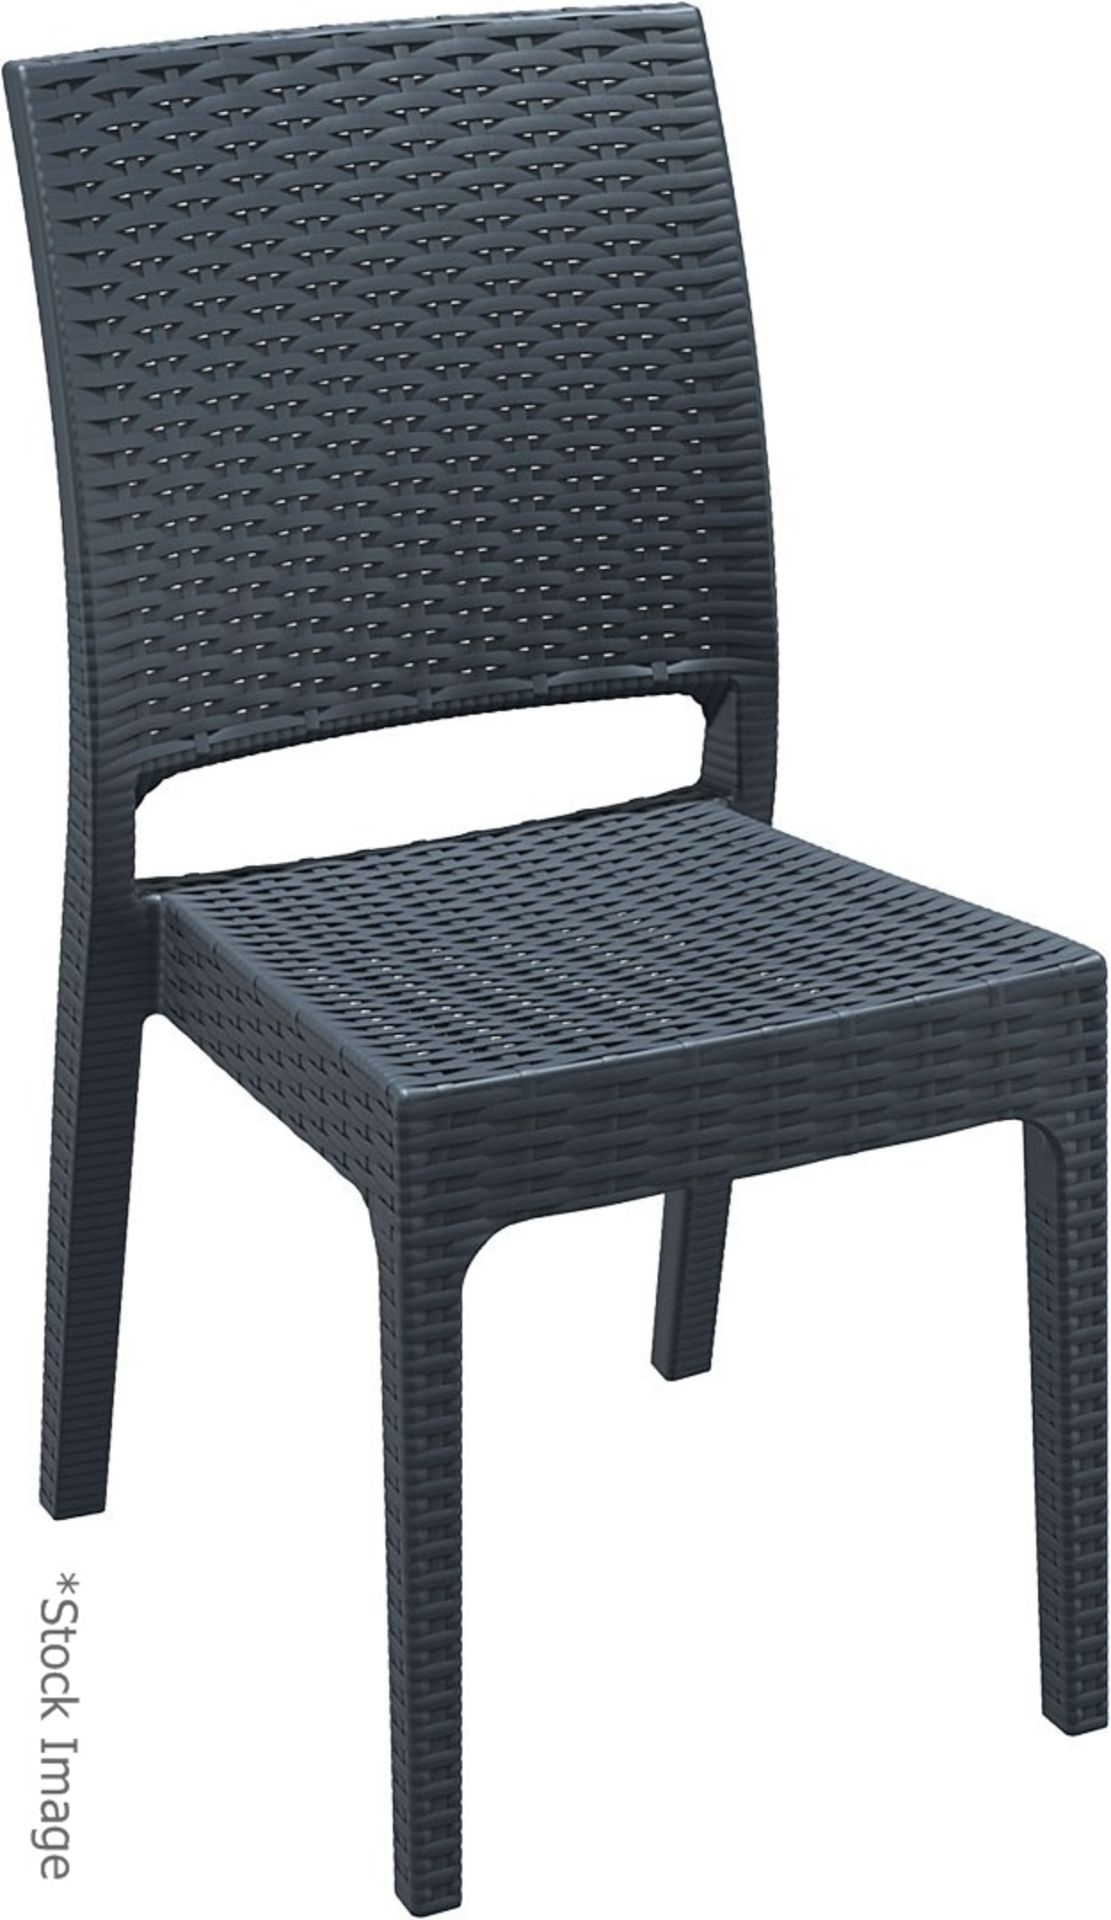 4 x SIESTA EXCLUSIVE 'Florida' Commercial Stackable Rattan-style Chairs In Dark Grey -CL987 - - Image 2 of 13